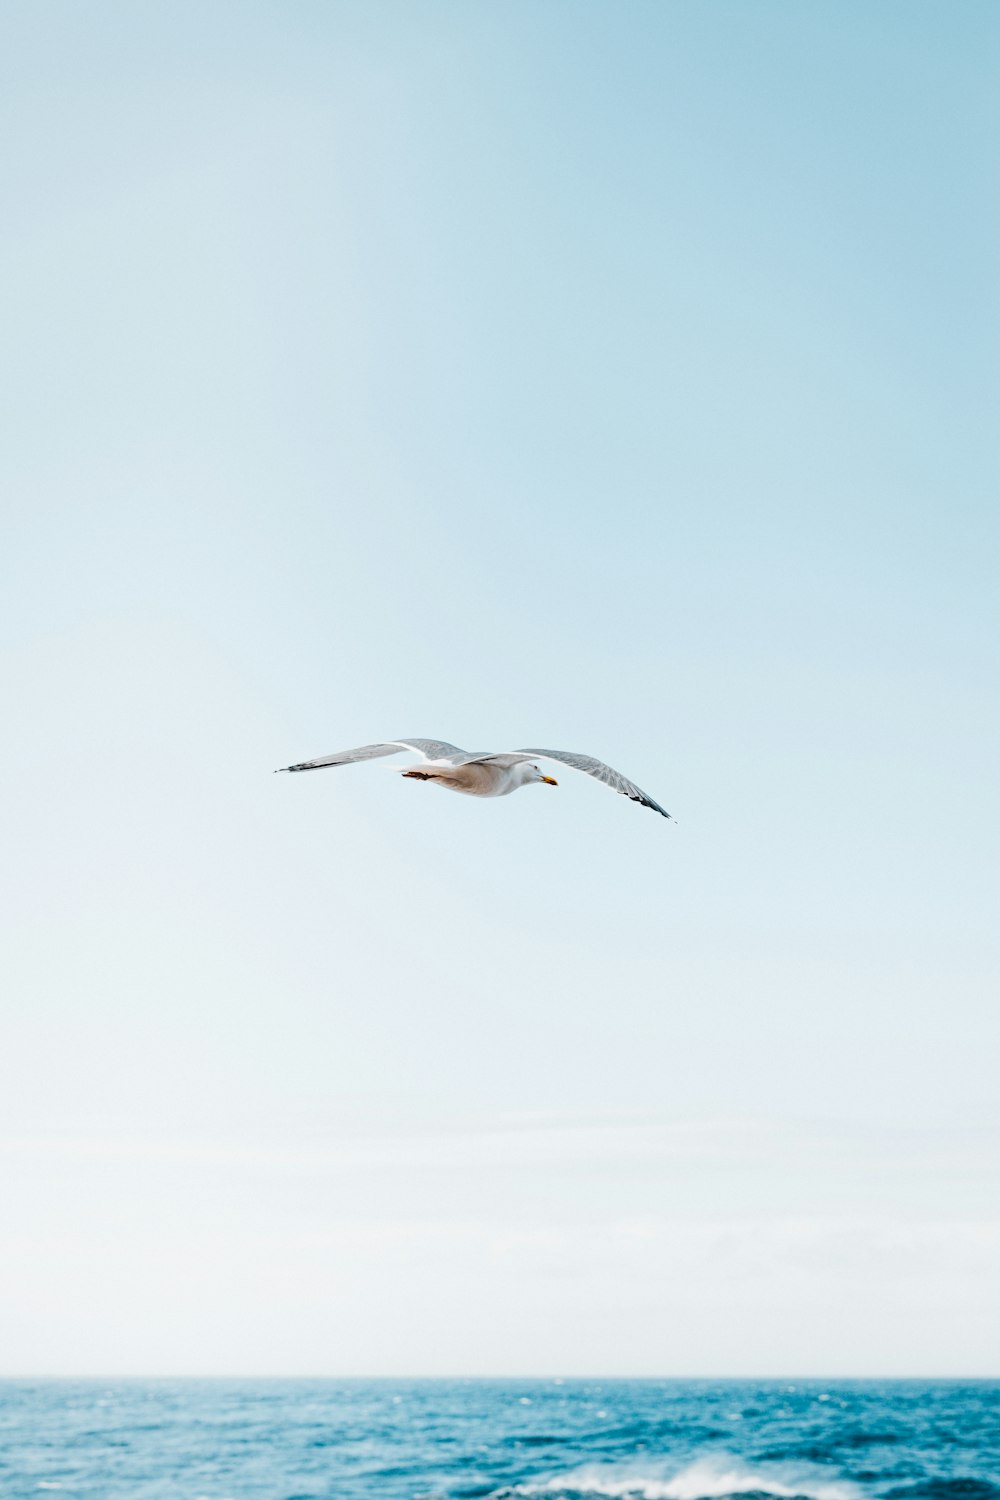 time-lapse photography of gull in flight over blue ocean